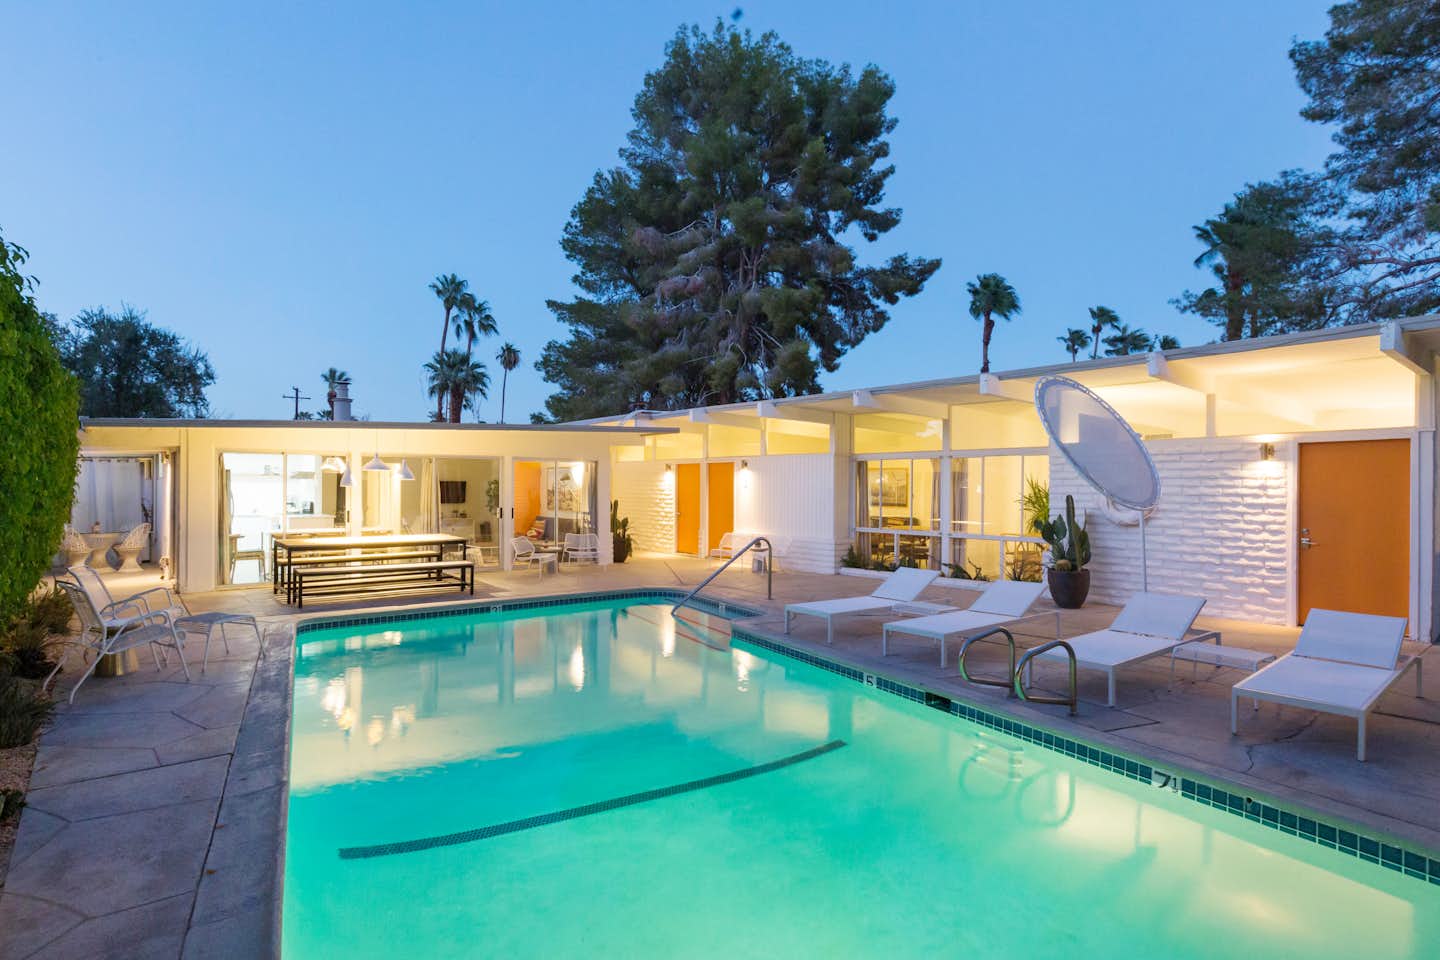 Photo 11 of 12 in A Celebrated Palm Springs Hotel Asks $1.5M - Dwell